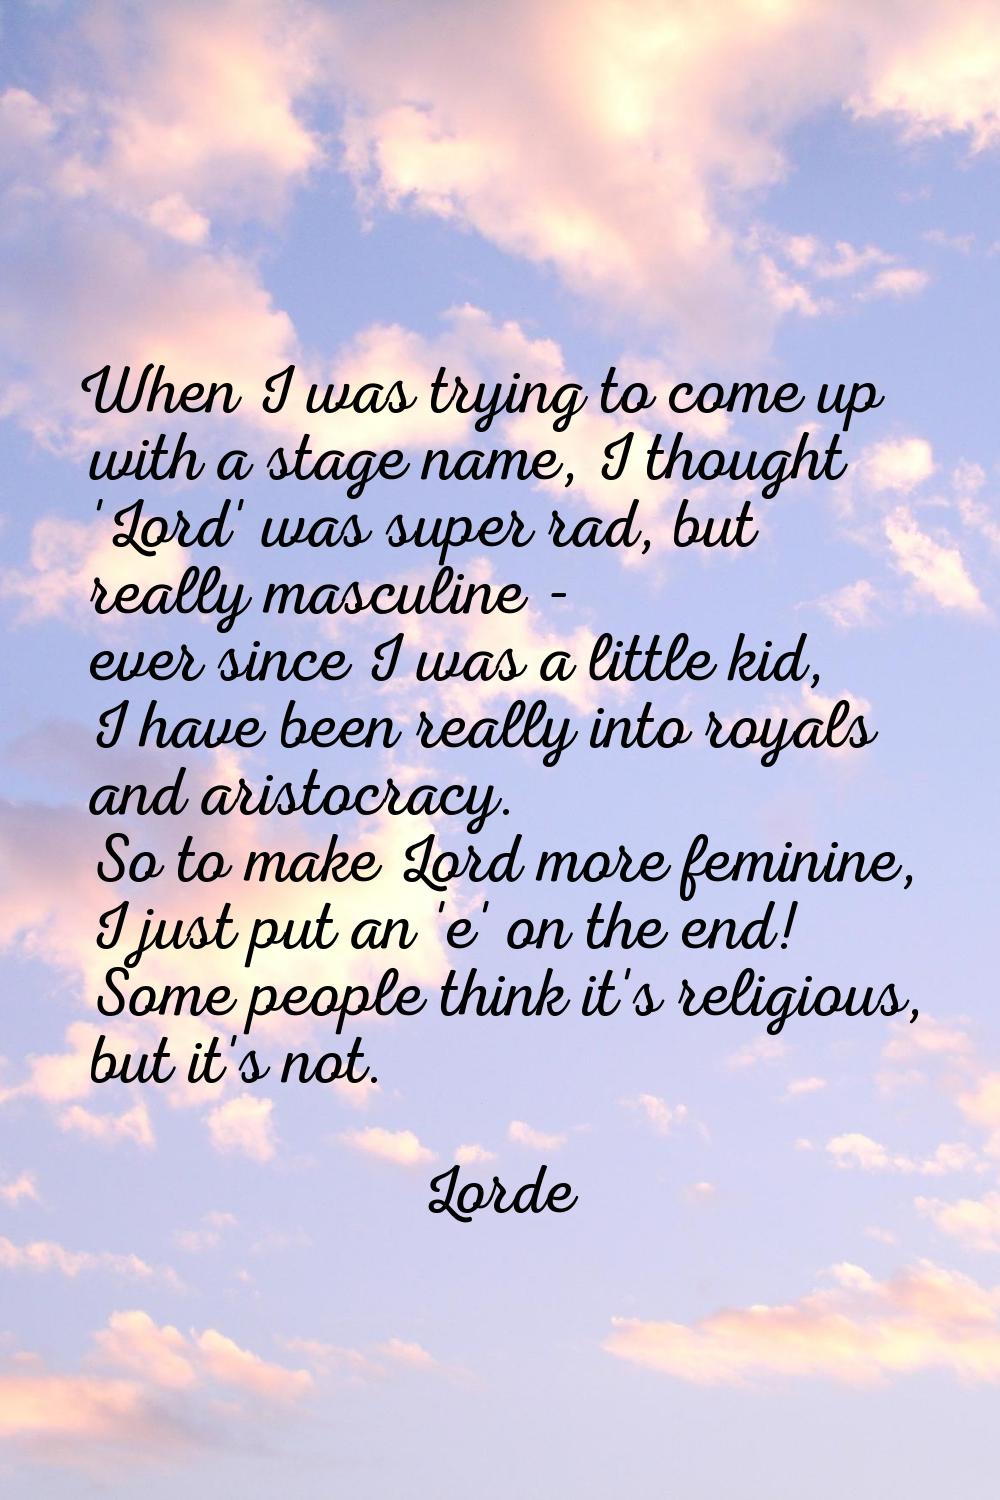 When I was trying to come up with a stage name, I thought 'Lord' was super rad, but really masculin